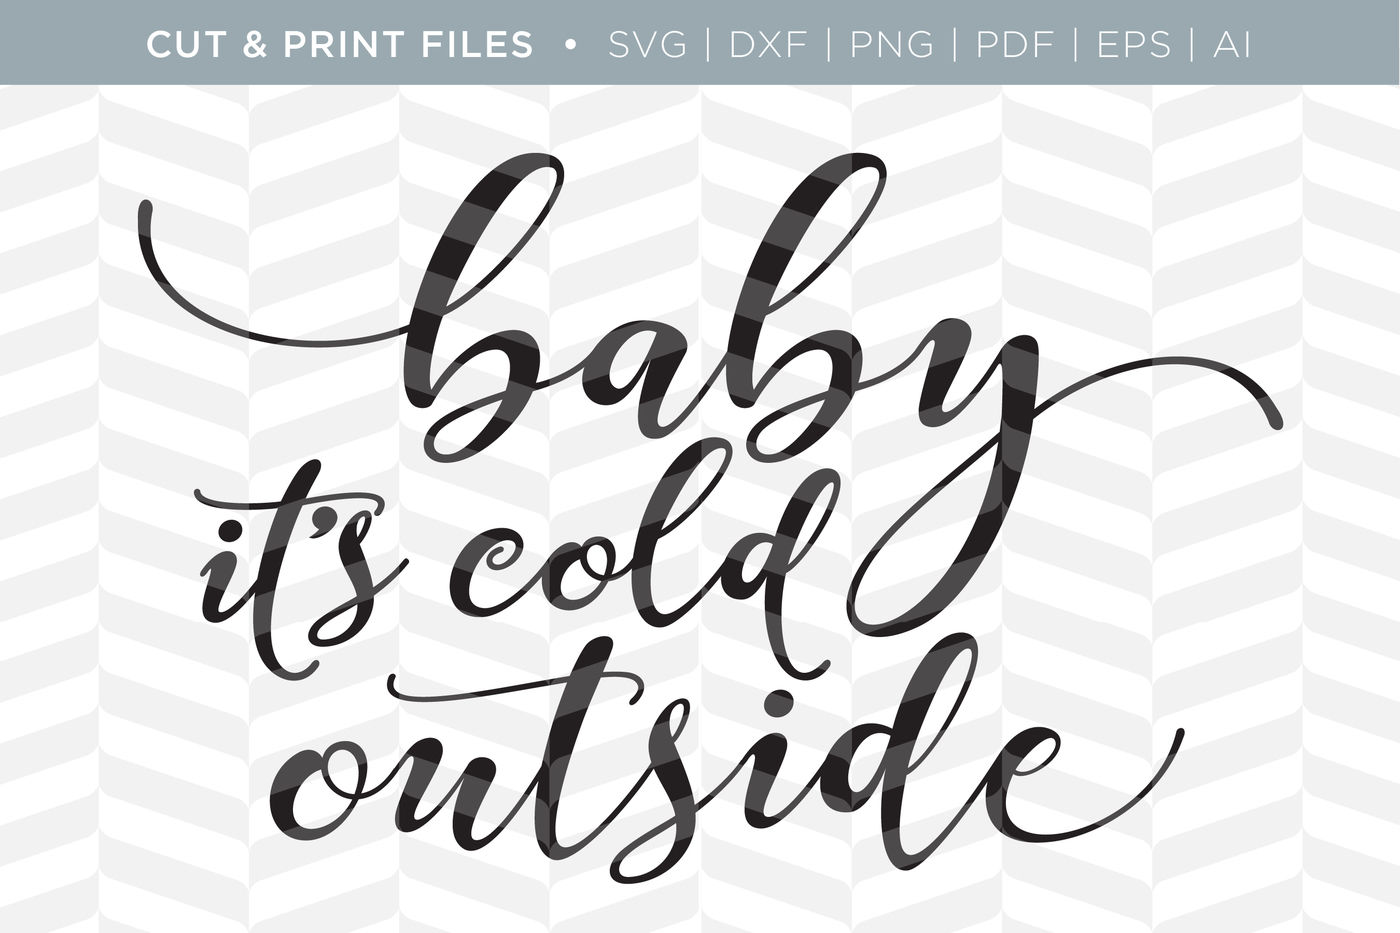 Download Baby it's Cold Outside - DXF/SVG/PNG/PDF Cut & Print Files ...